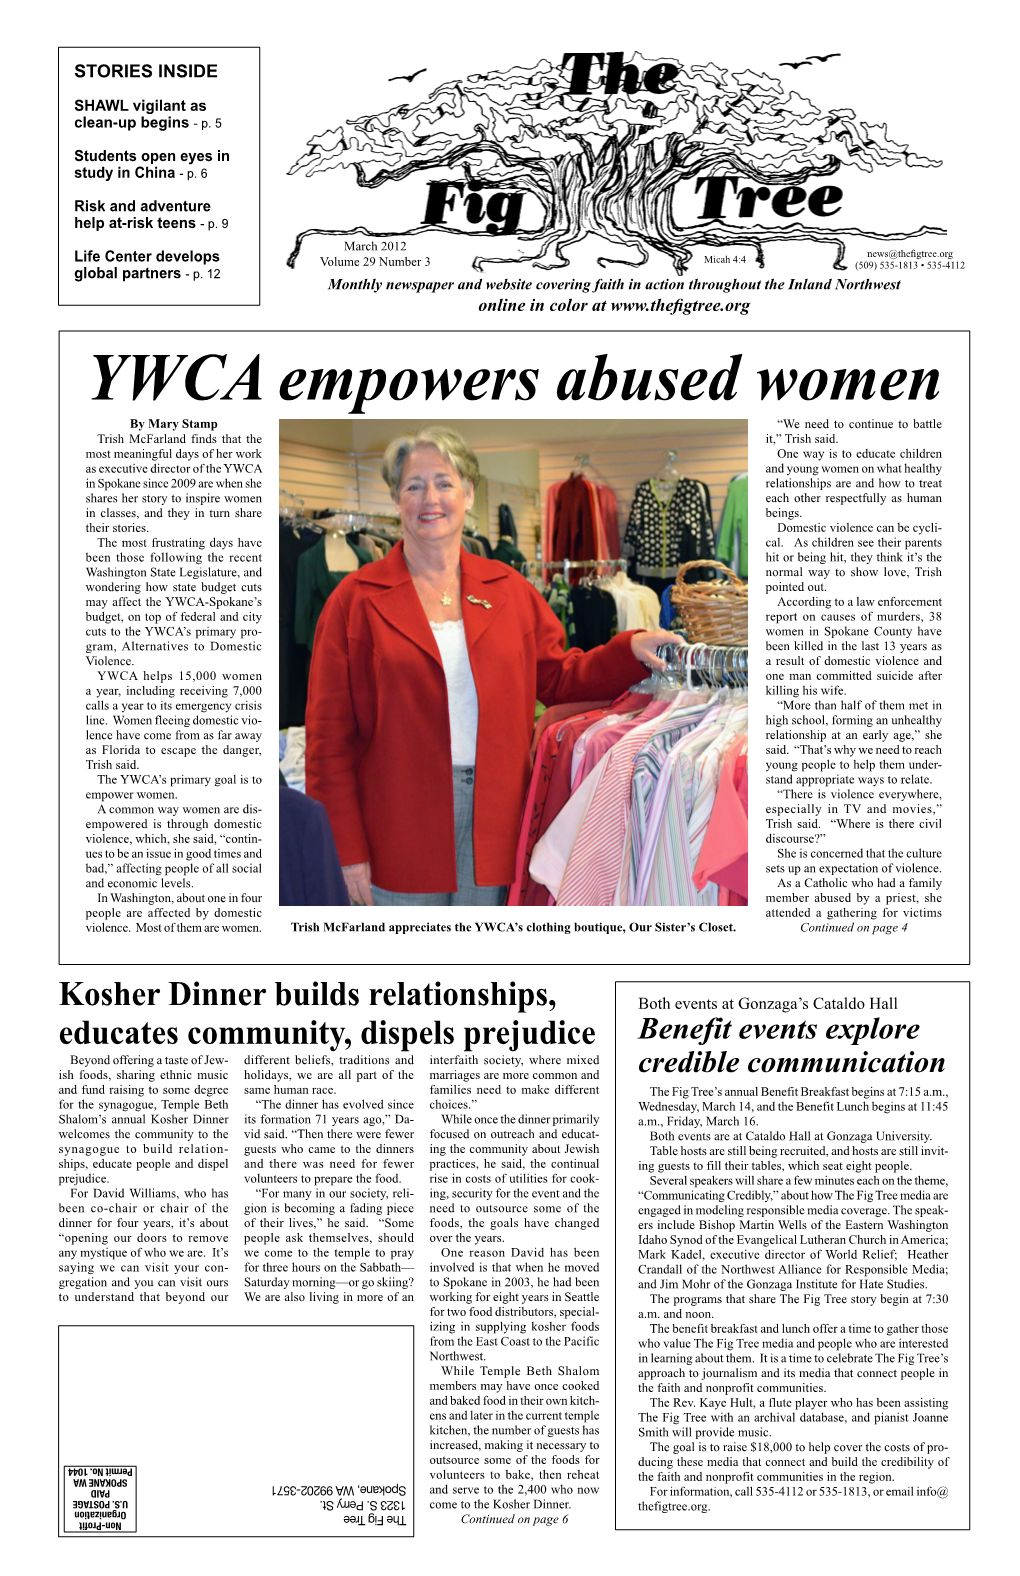 YWCA Empowers Abused Women by Mary Stamp “We Need to Continue to Battle Trish Mcfarland Finds That the It,” Trish Said